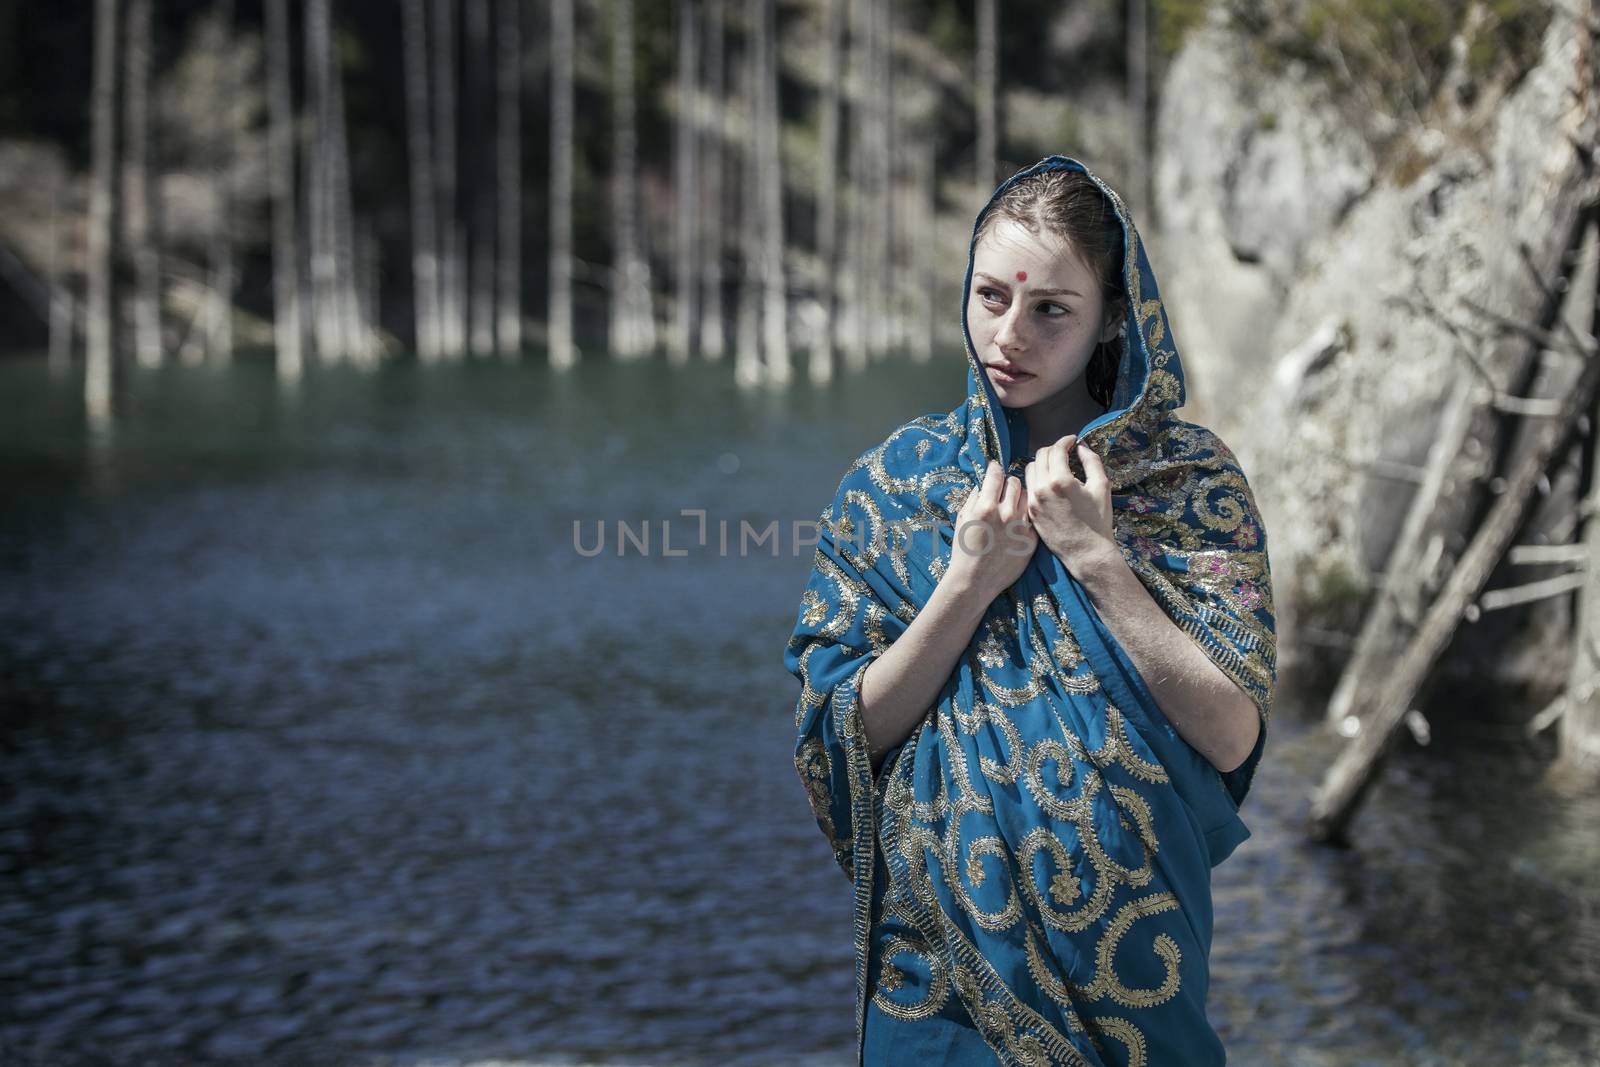 The girl poses in the Indian sari by snep_photo